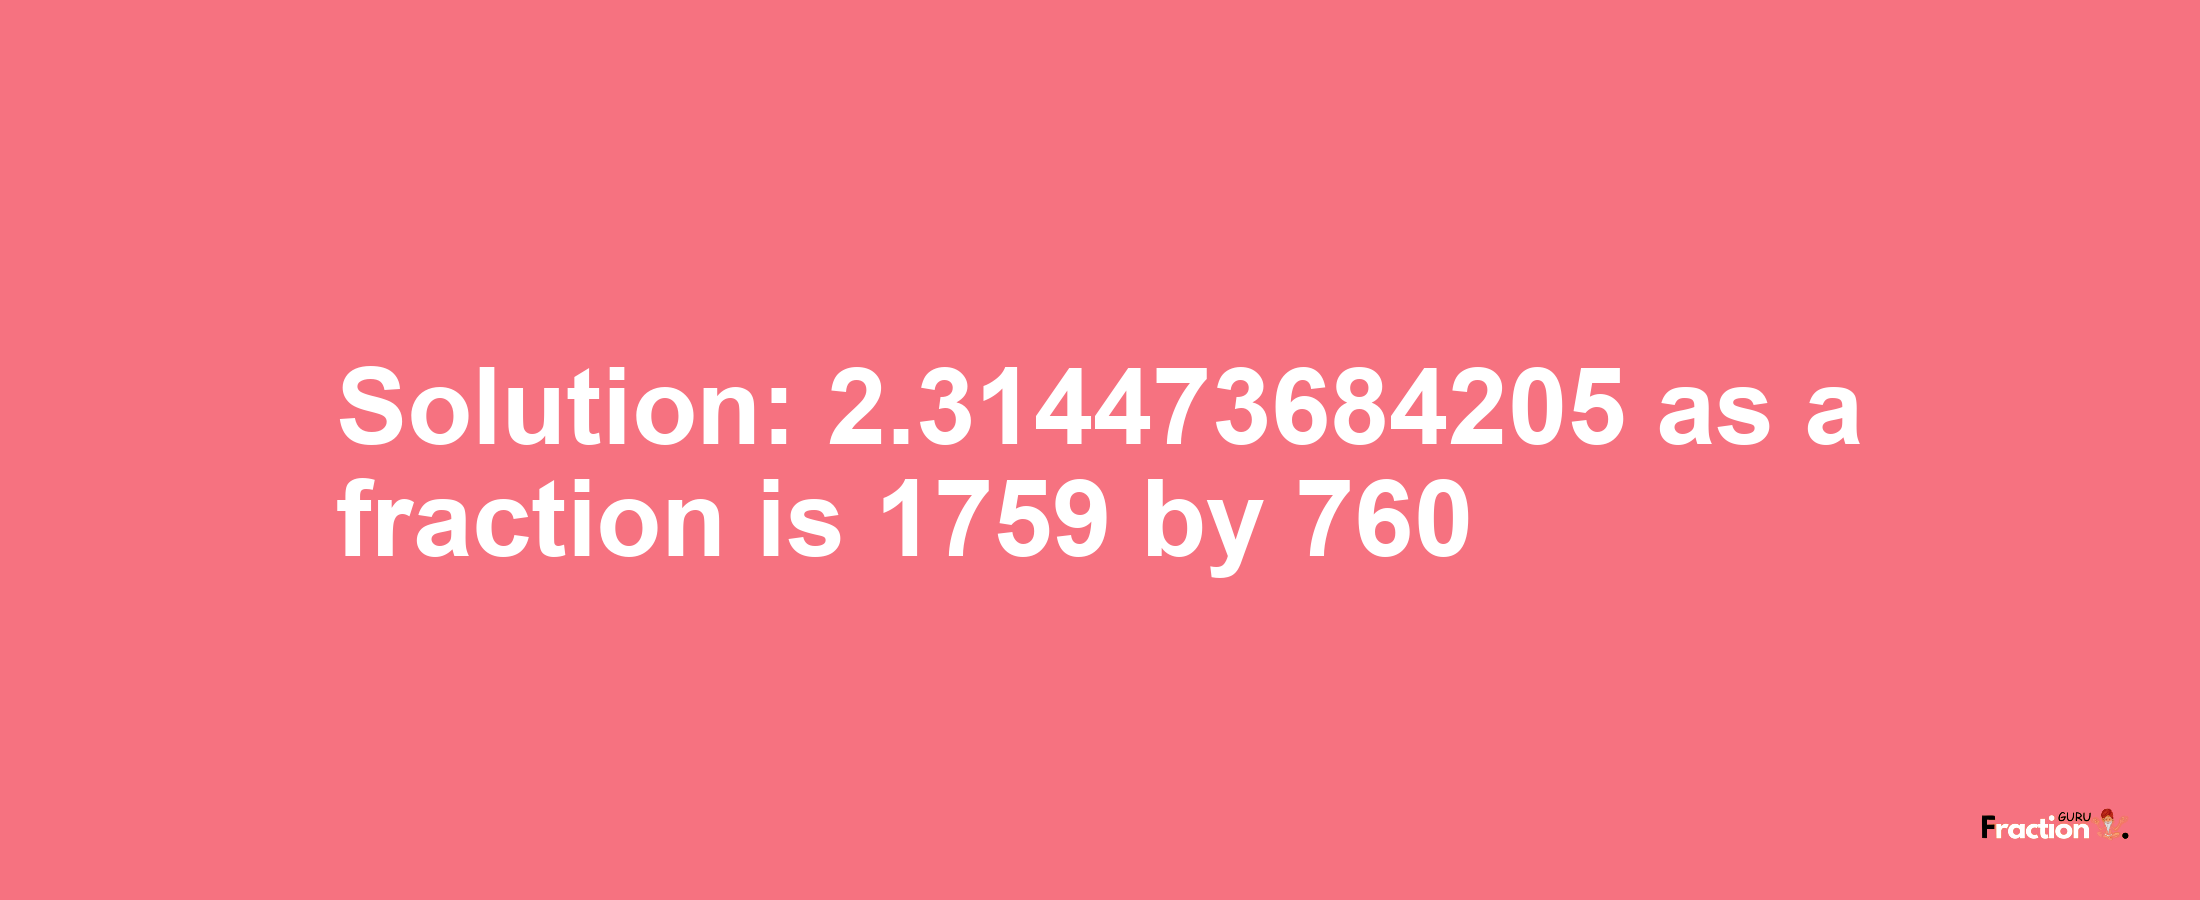 Solution:2.314473684205 as a fraction is 1759/760